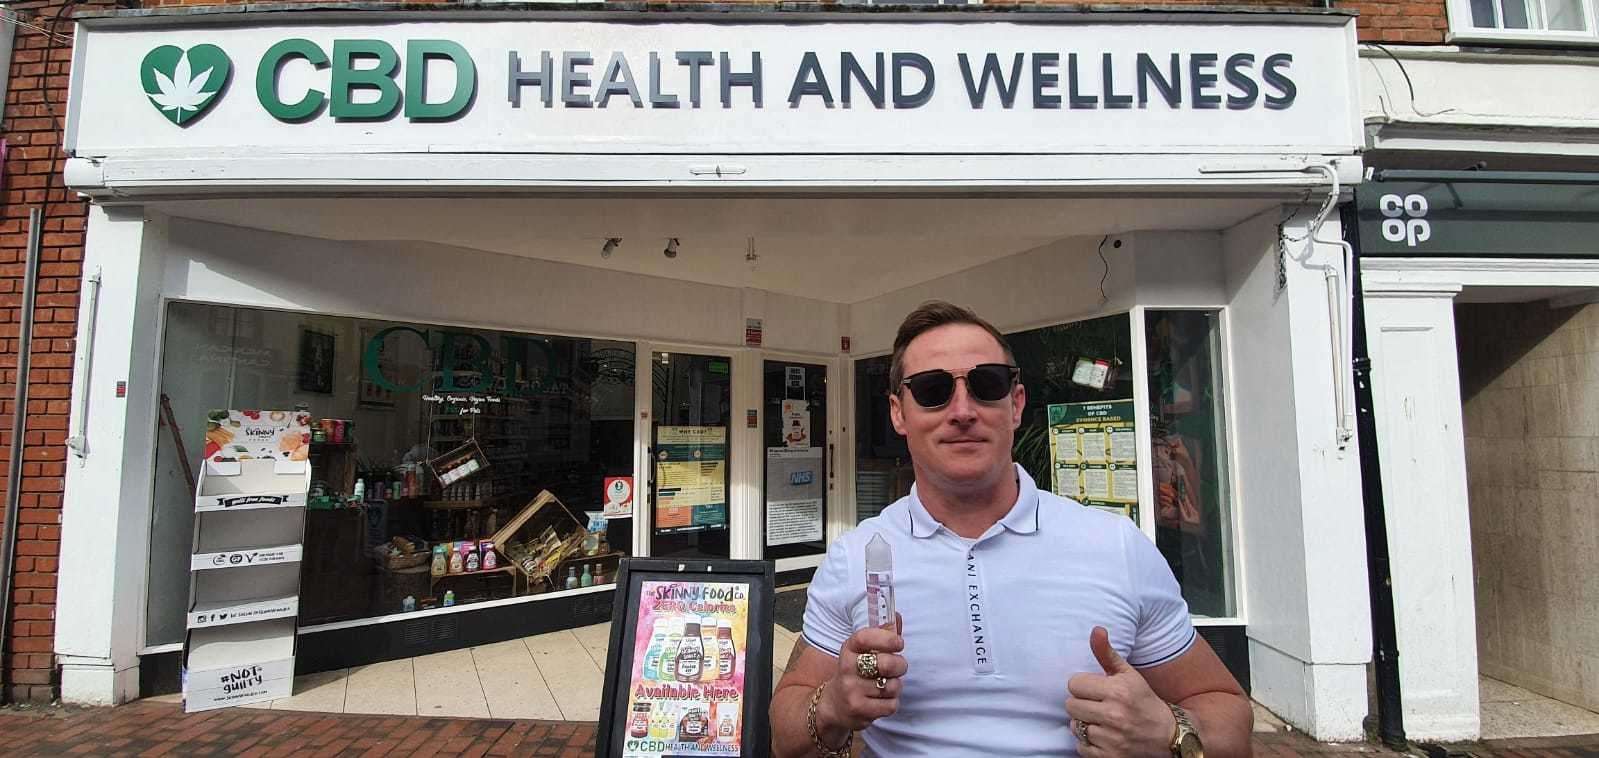 Sittingbourne businessman Terry Utting will be giving out free hand sanitiser to customers of his CBD shop from Friday